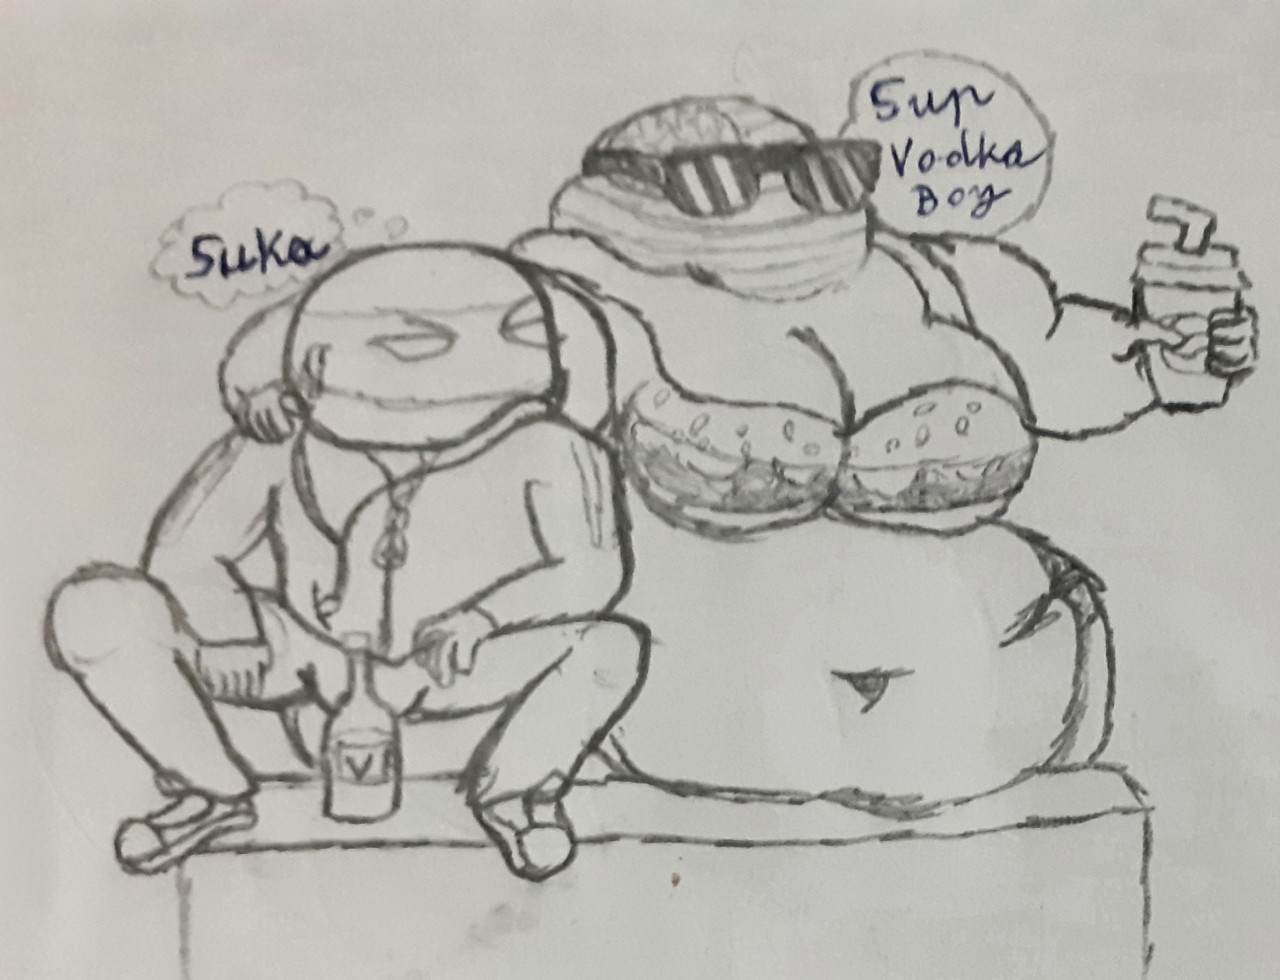 CountryHumans Russia and USA by Rizzeli -- Fur Affinity [dot] net